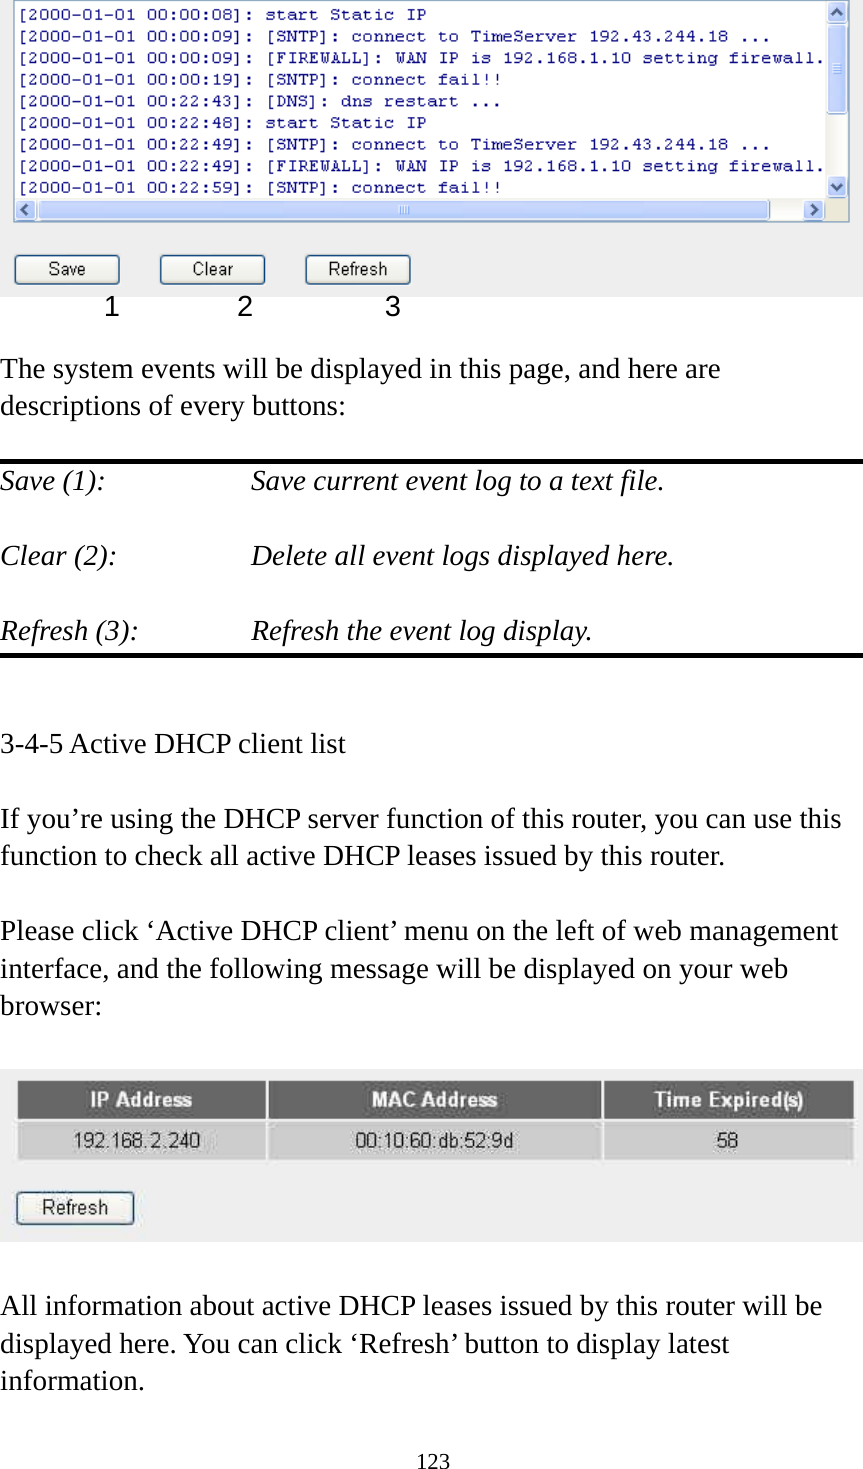 123   The system events will be displayed in this page, and here are descriptions of every buttons:  Save (1):        Save current event log to a text file.  Clear (2):        Delete all event logs displayed here.  Refresh (3):      Refresh the event log display.   3-4-5 Active DHCP client list  If you’re using the DHCP server function of this router, you can use this function to check all active DHCP leases issued by this router.  Please click ‘Active DHCP client’ menu on the left of web management interface, and the following message will be displayed on your web browser:    All information about active DHCP leases issued by this router will be displayed here. You can click ‘Refresh’ button to display latest information. 1 2  3